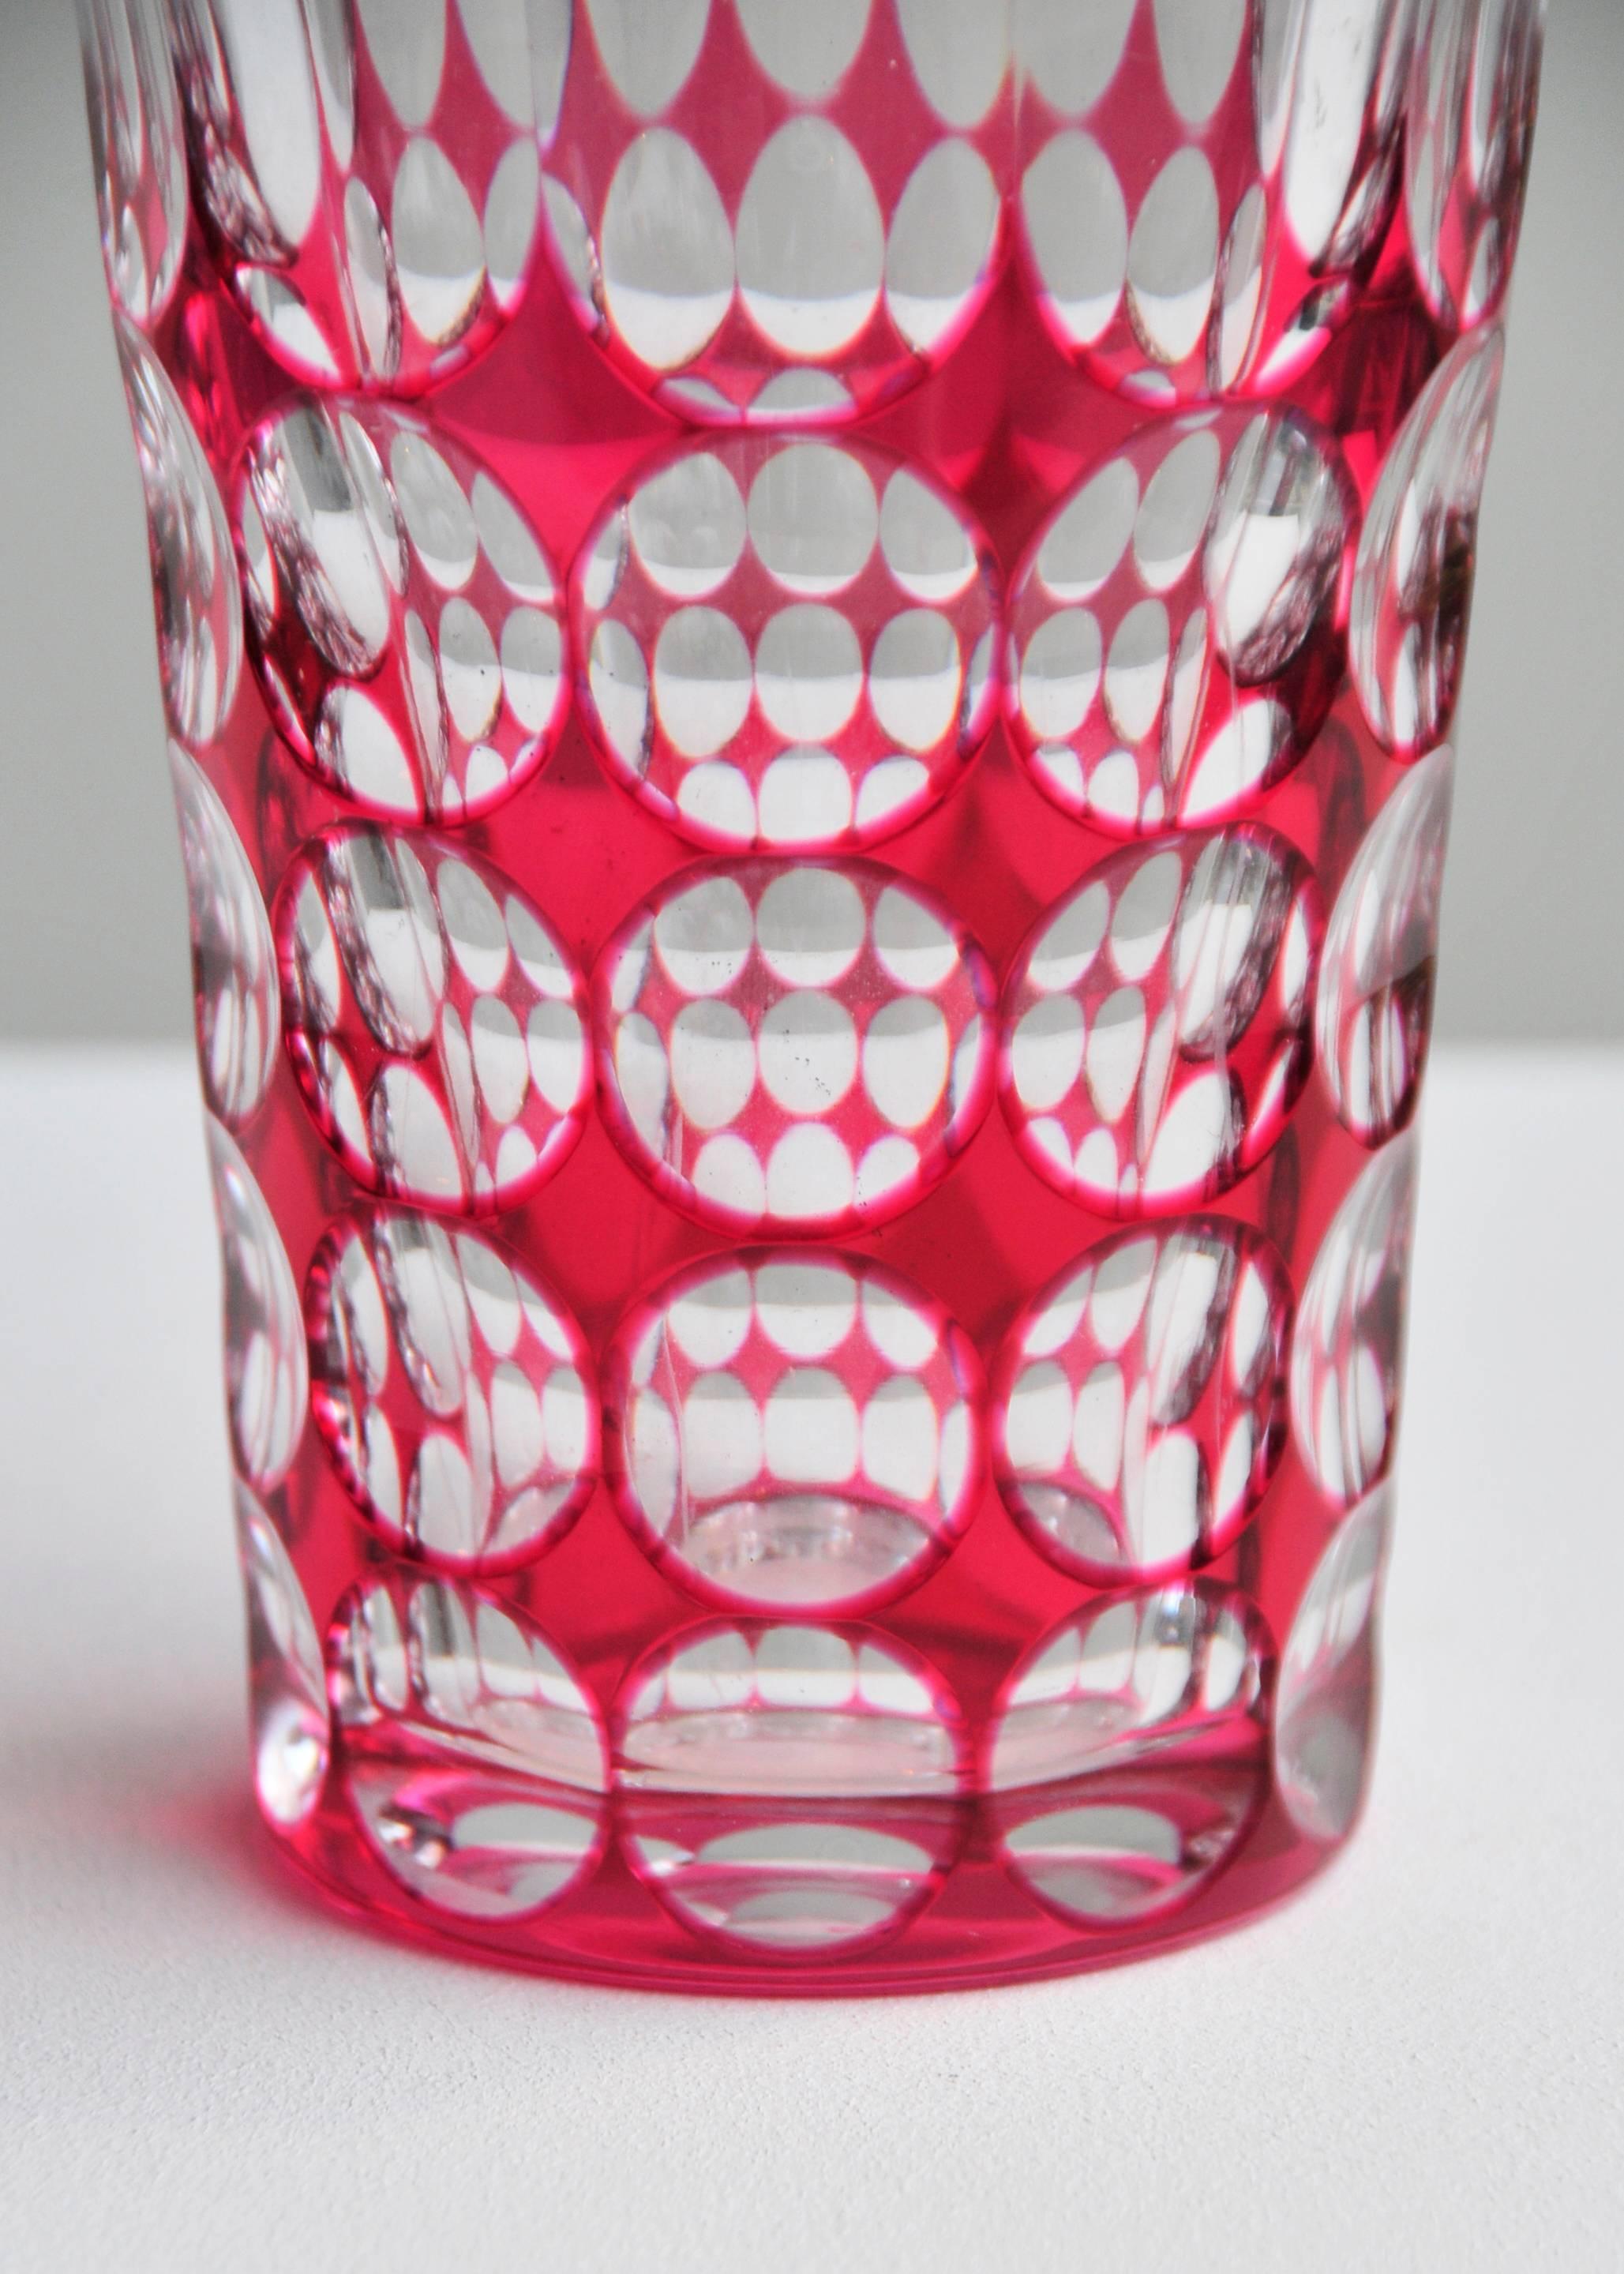 Geometric cut-glass with prismatic red coloring.

Belgium, early 20th century.